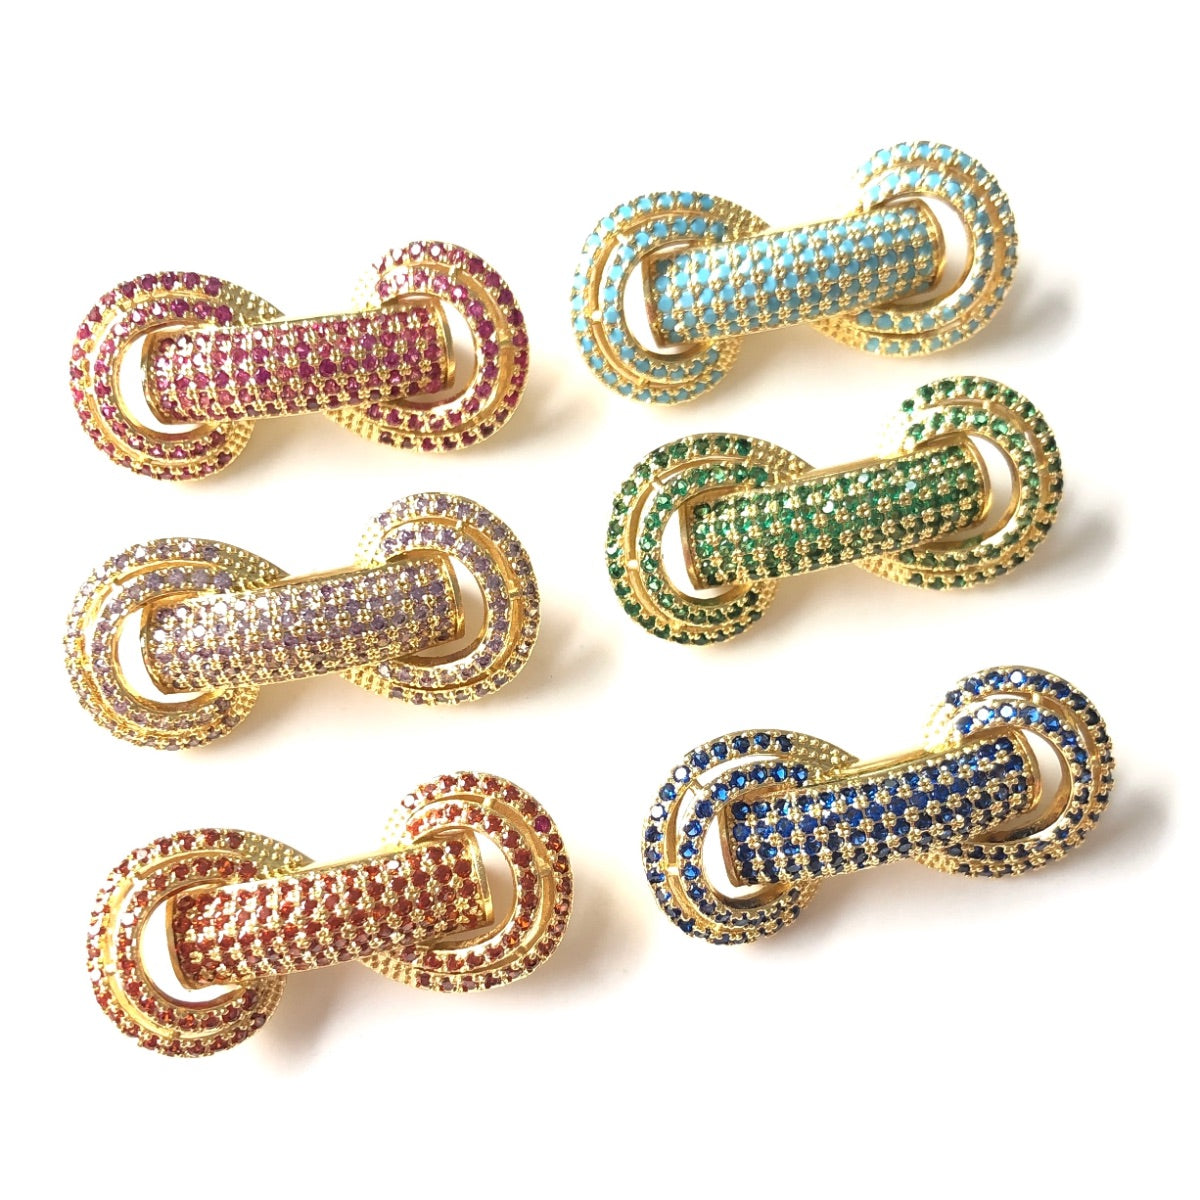 6pcs/lot 31*14.5*8mm Multicolor Purple Green Blue Fuchsia Reddish Orange Turquoise CZ Paved Tube Bar Spacers Mix Gold-6pcs CZ Paved Spacers Colorful Zirconia New Spacers Arrivals Tube Bar Centerpieces Charms Beads Beyond